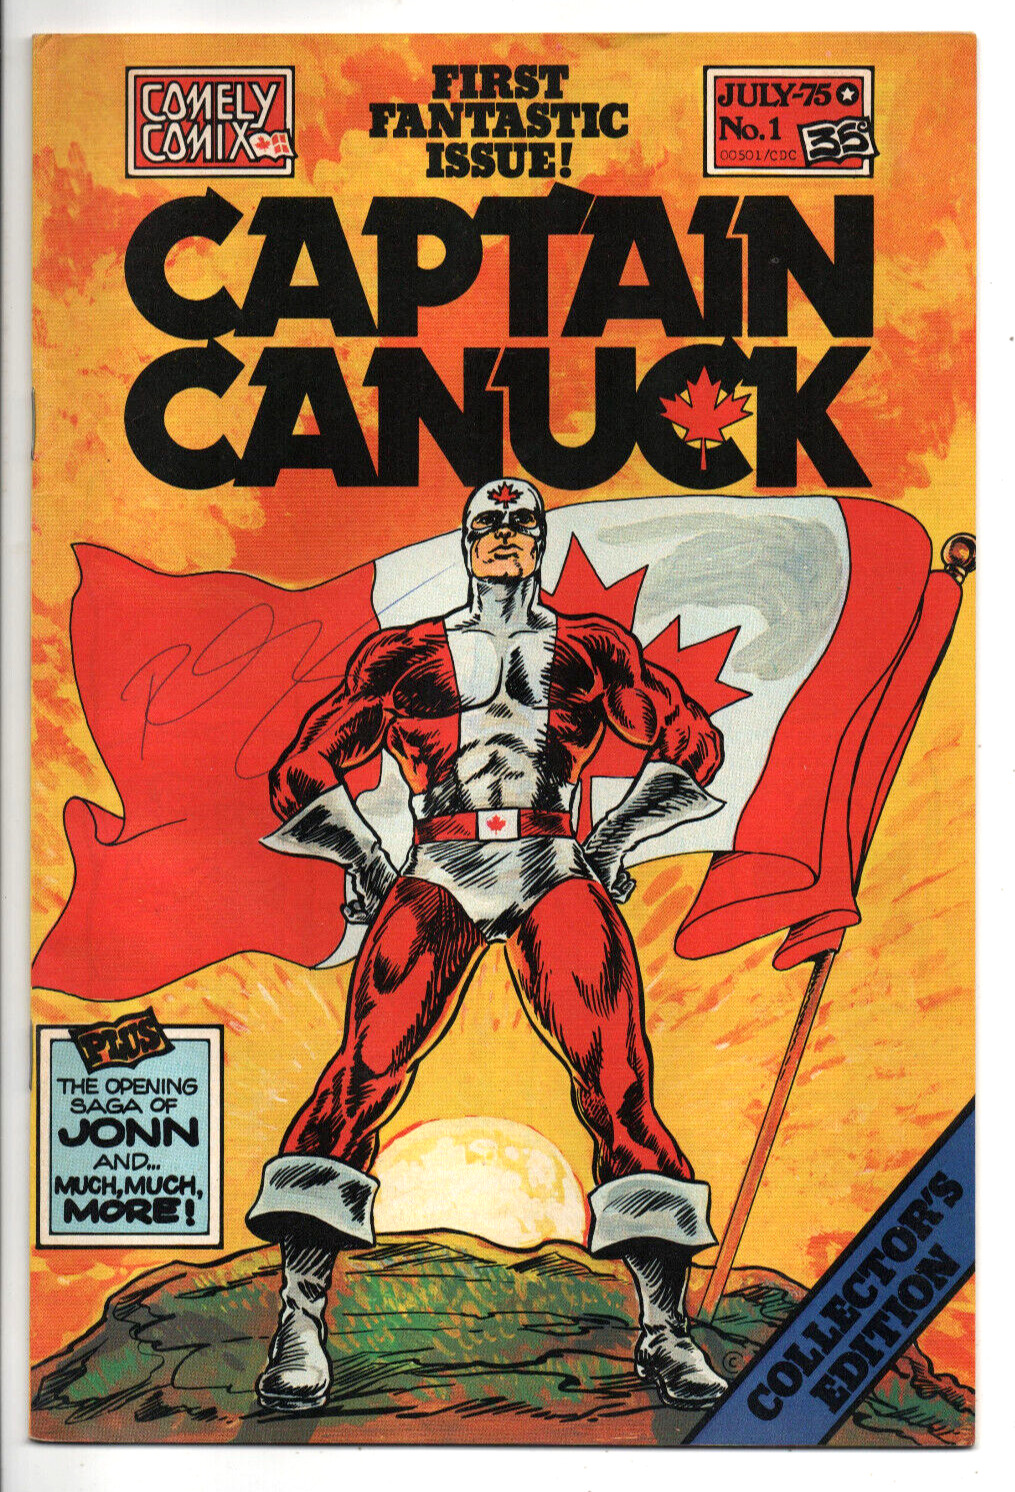 1975 CAPTAIN CANUCK #1 + 1993 CAPTAIN CANUCK REBORN #1 signed by Richard Comely